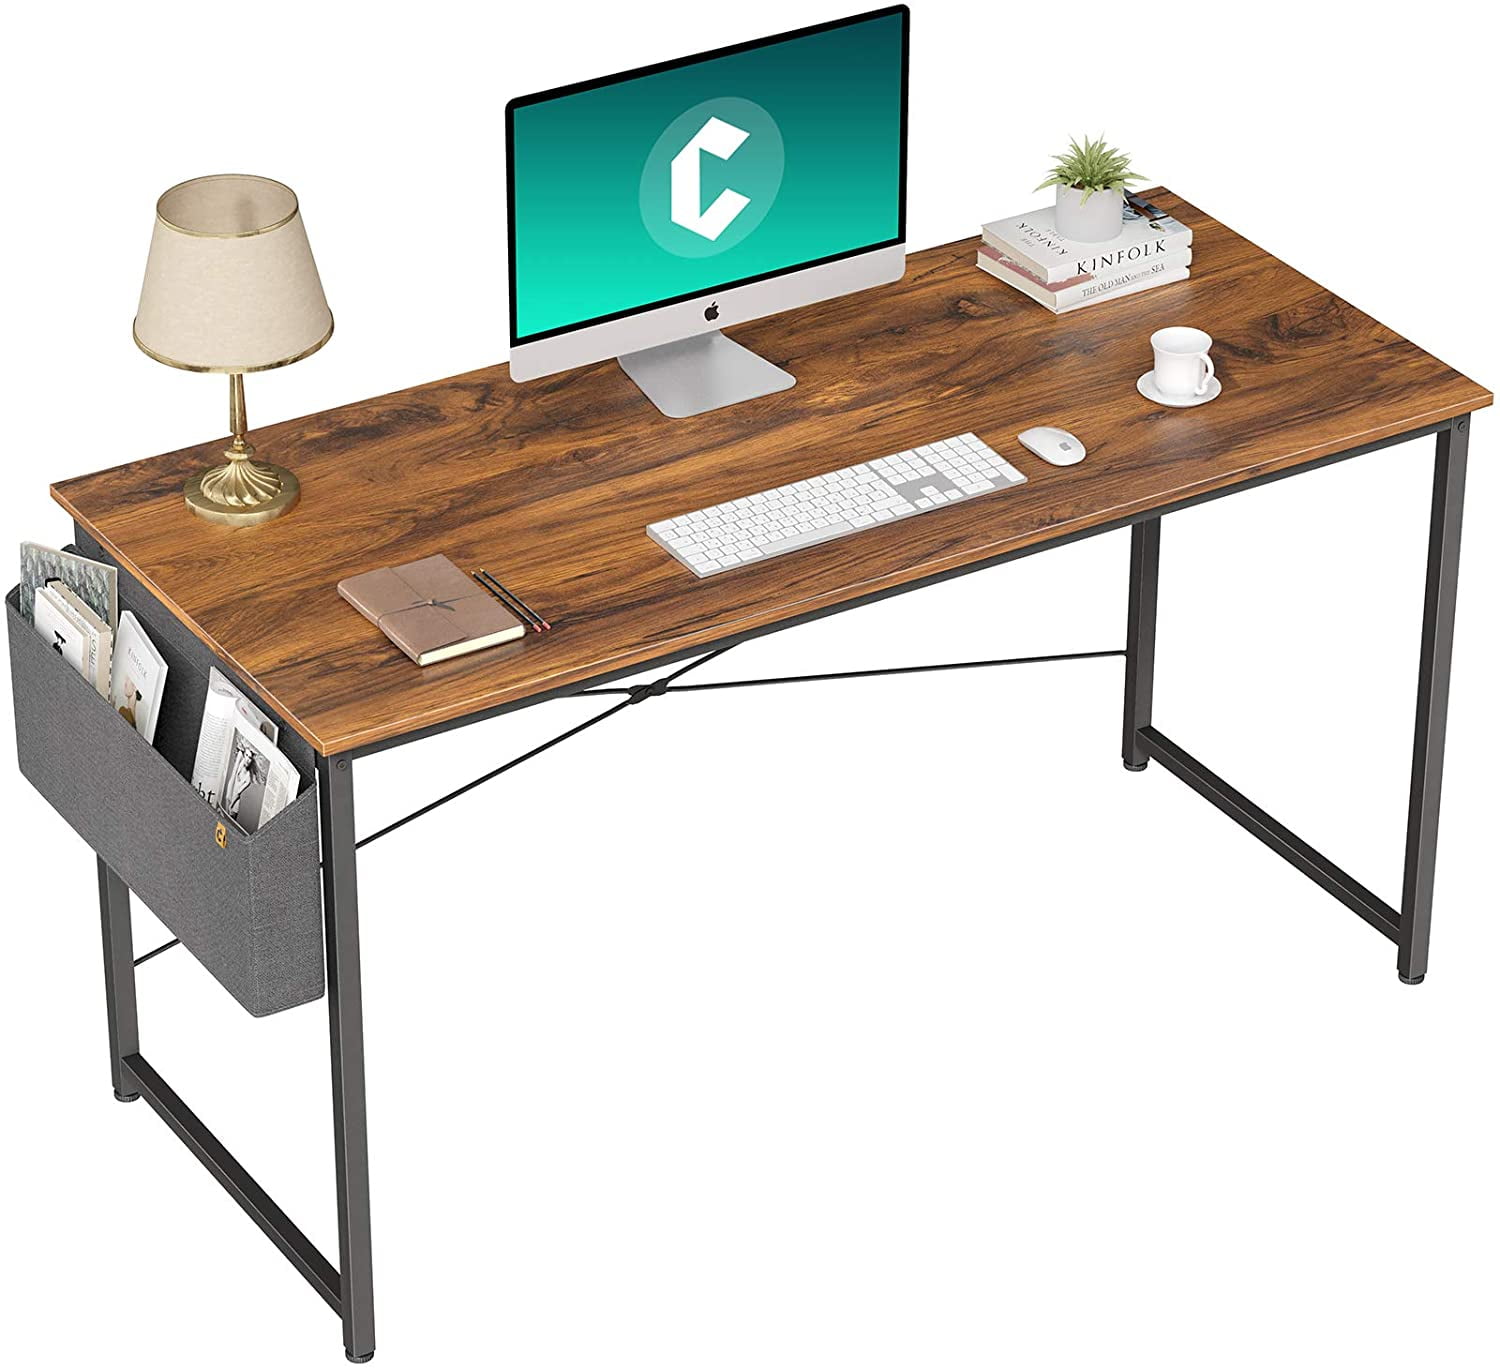 Black Espresso Cubiker Writing Computer Desk 39 Home Office Study Laptop Table Modern Simple Style Desk with Drawer